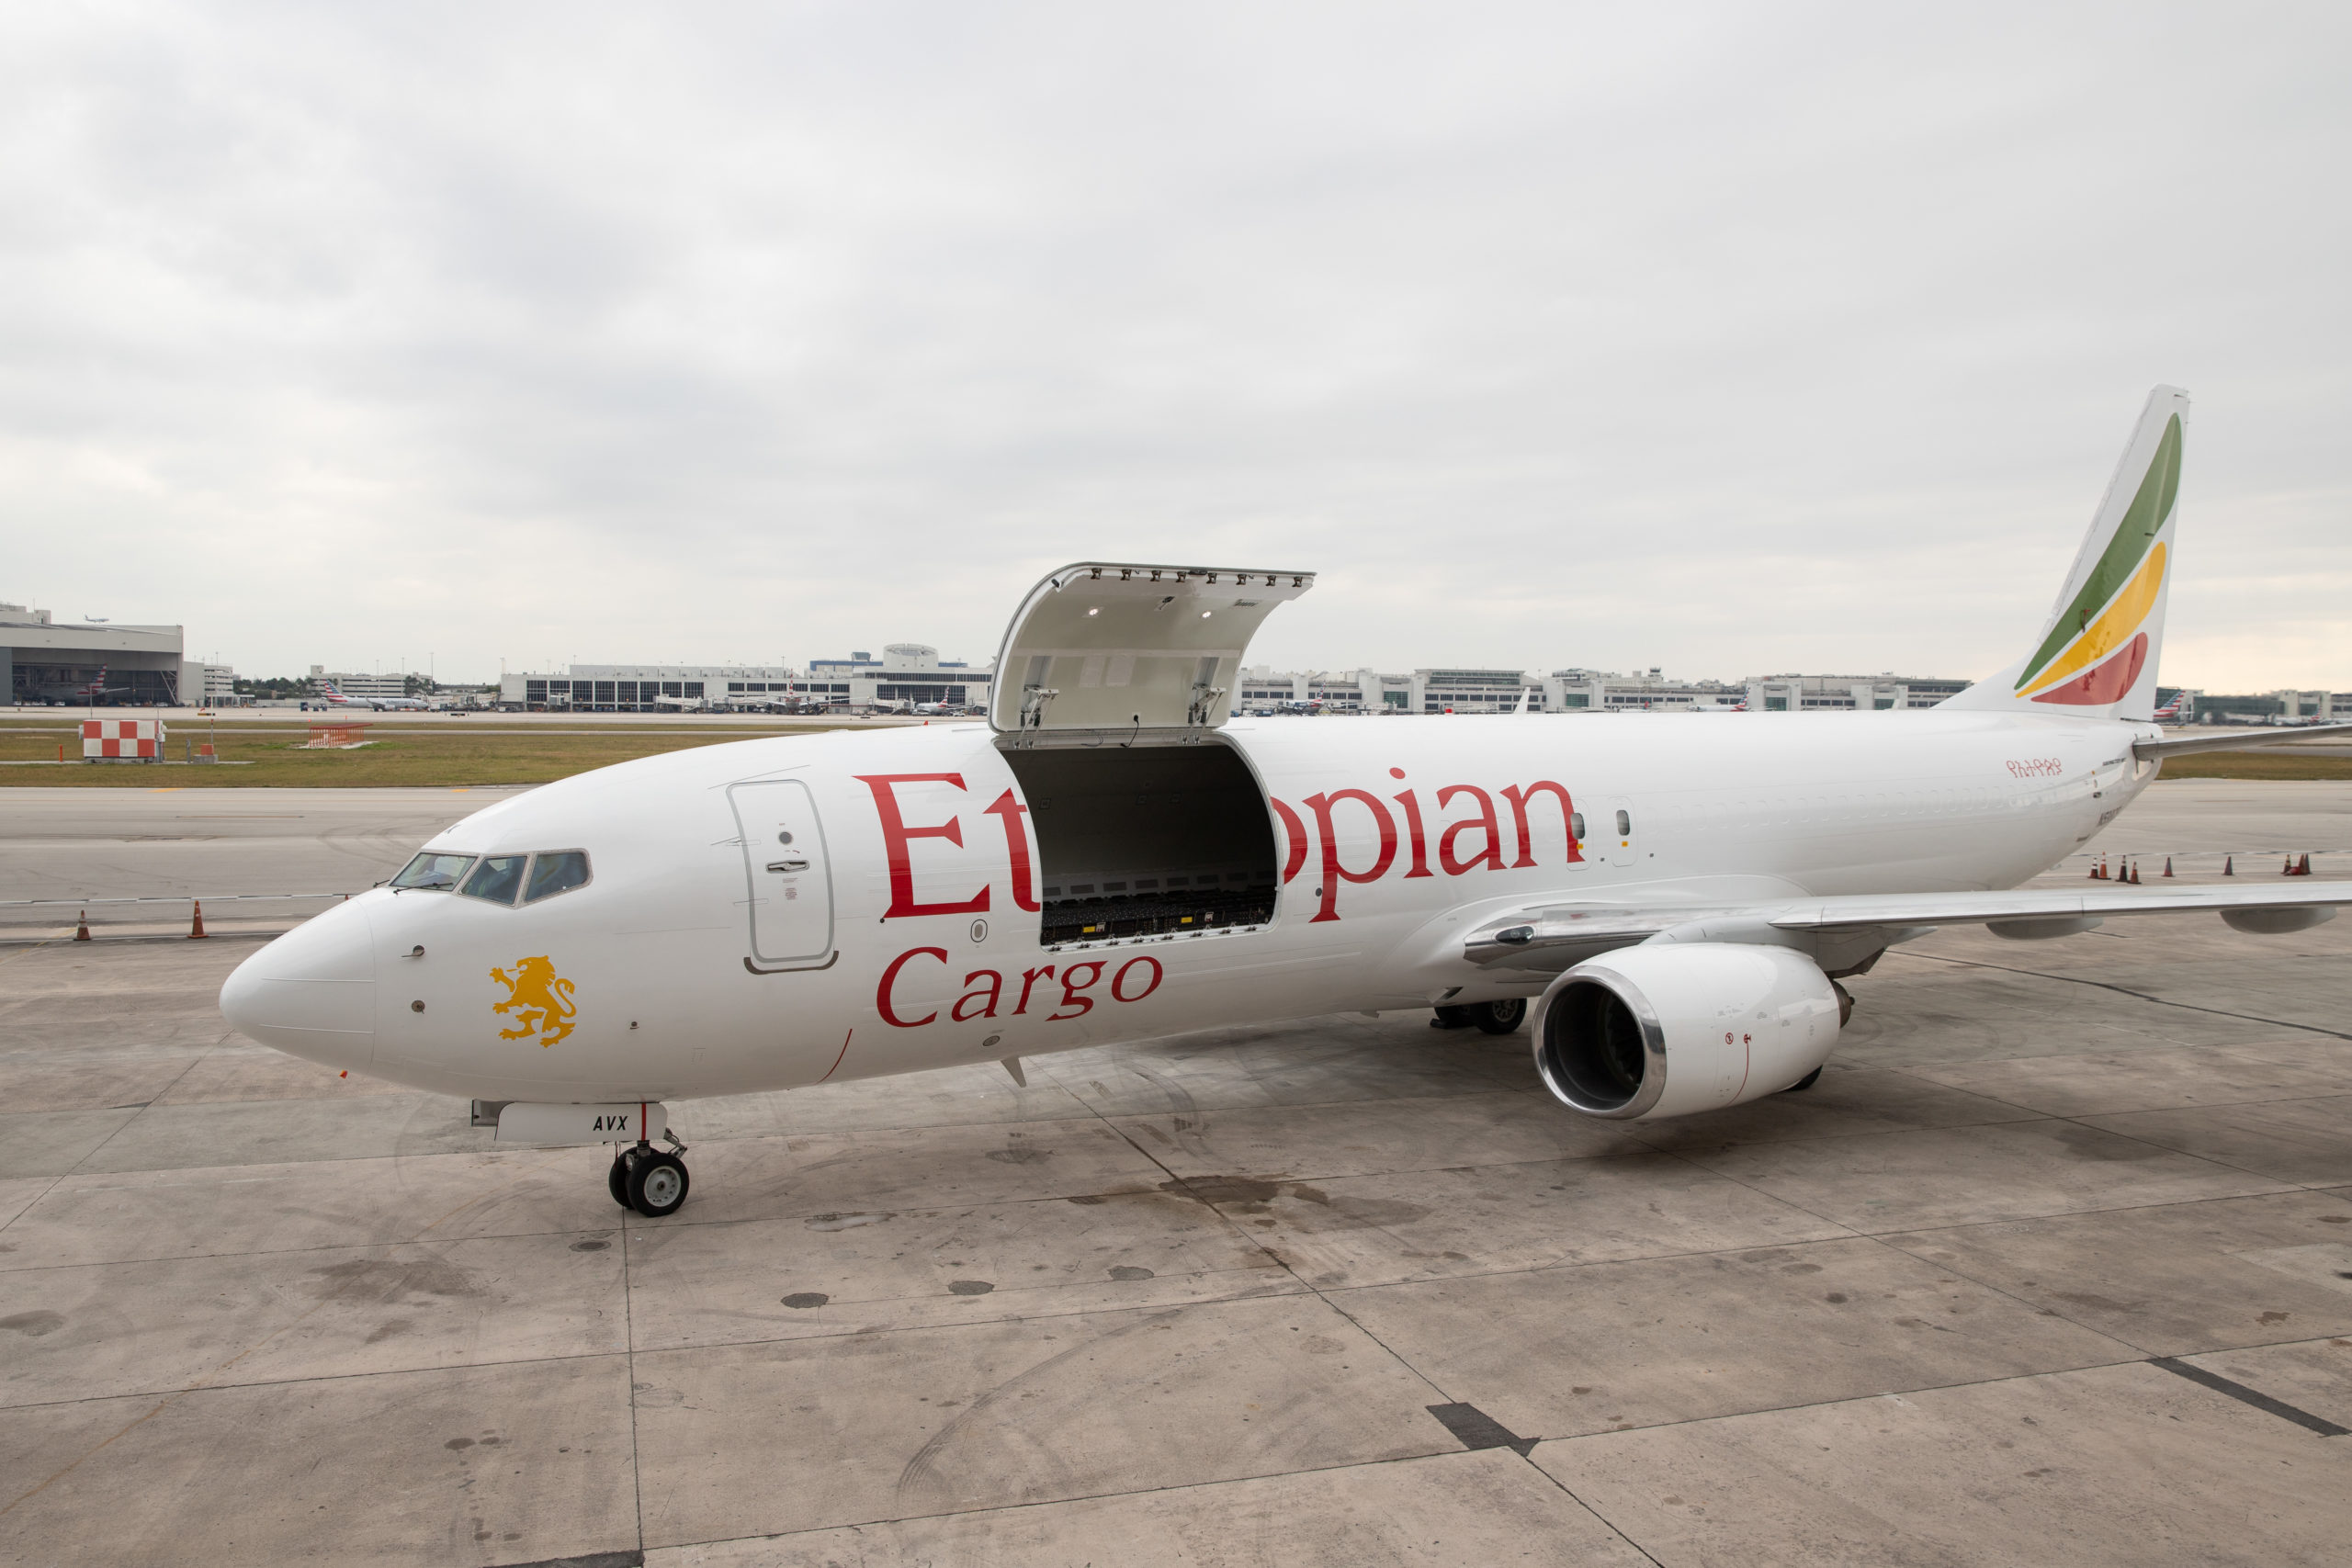 Ethiopian Cargo, launch operator for AEI's 737-800SF, took redelivery of the first of two aircraft leased from GECAS.